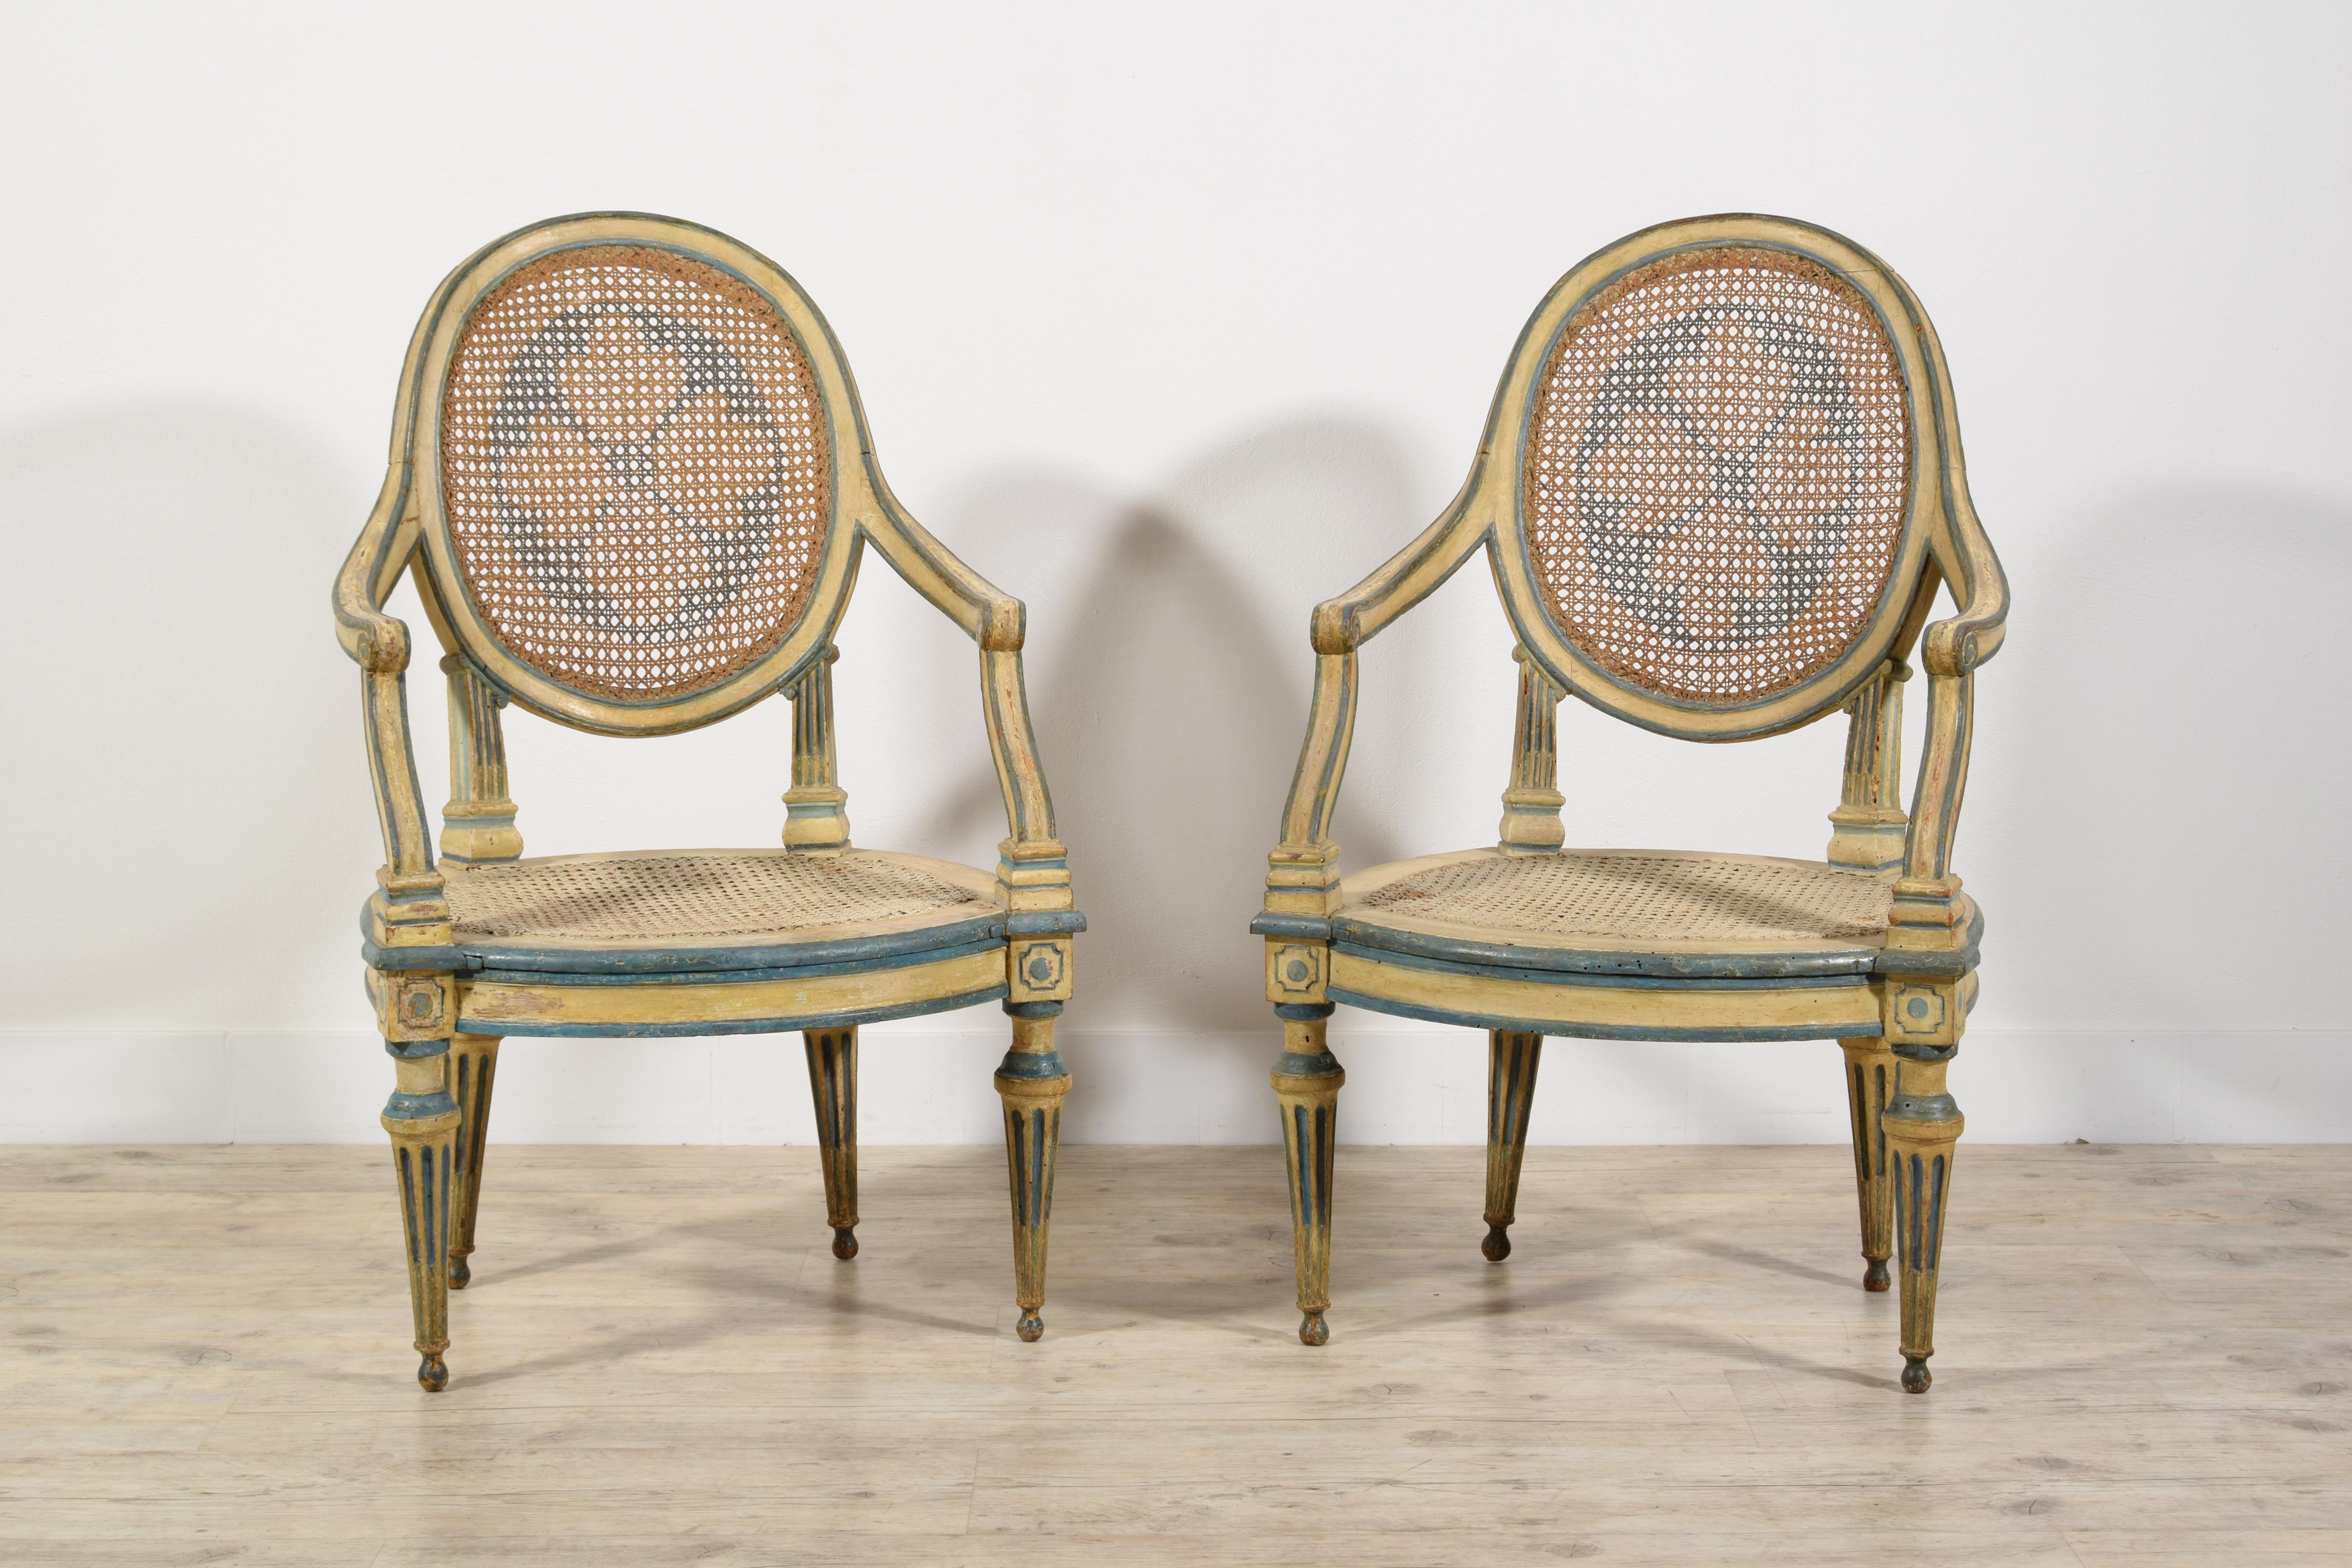 18th Century Pair of Italian Neoclassical Lacquered Wood Armchairs For Sale 4